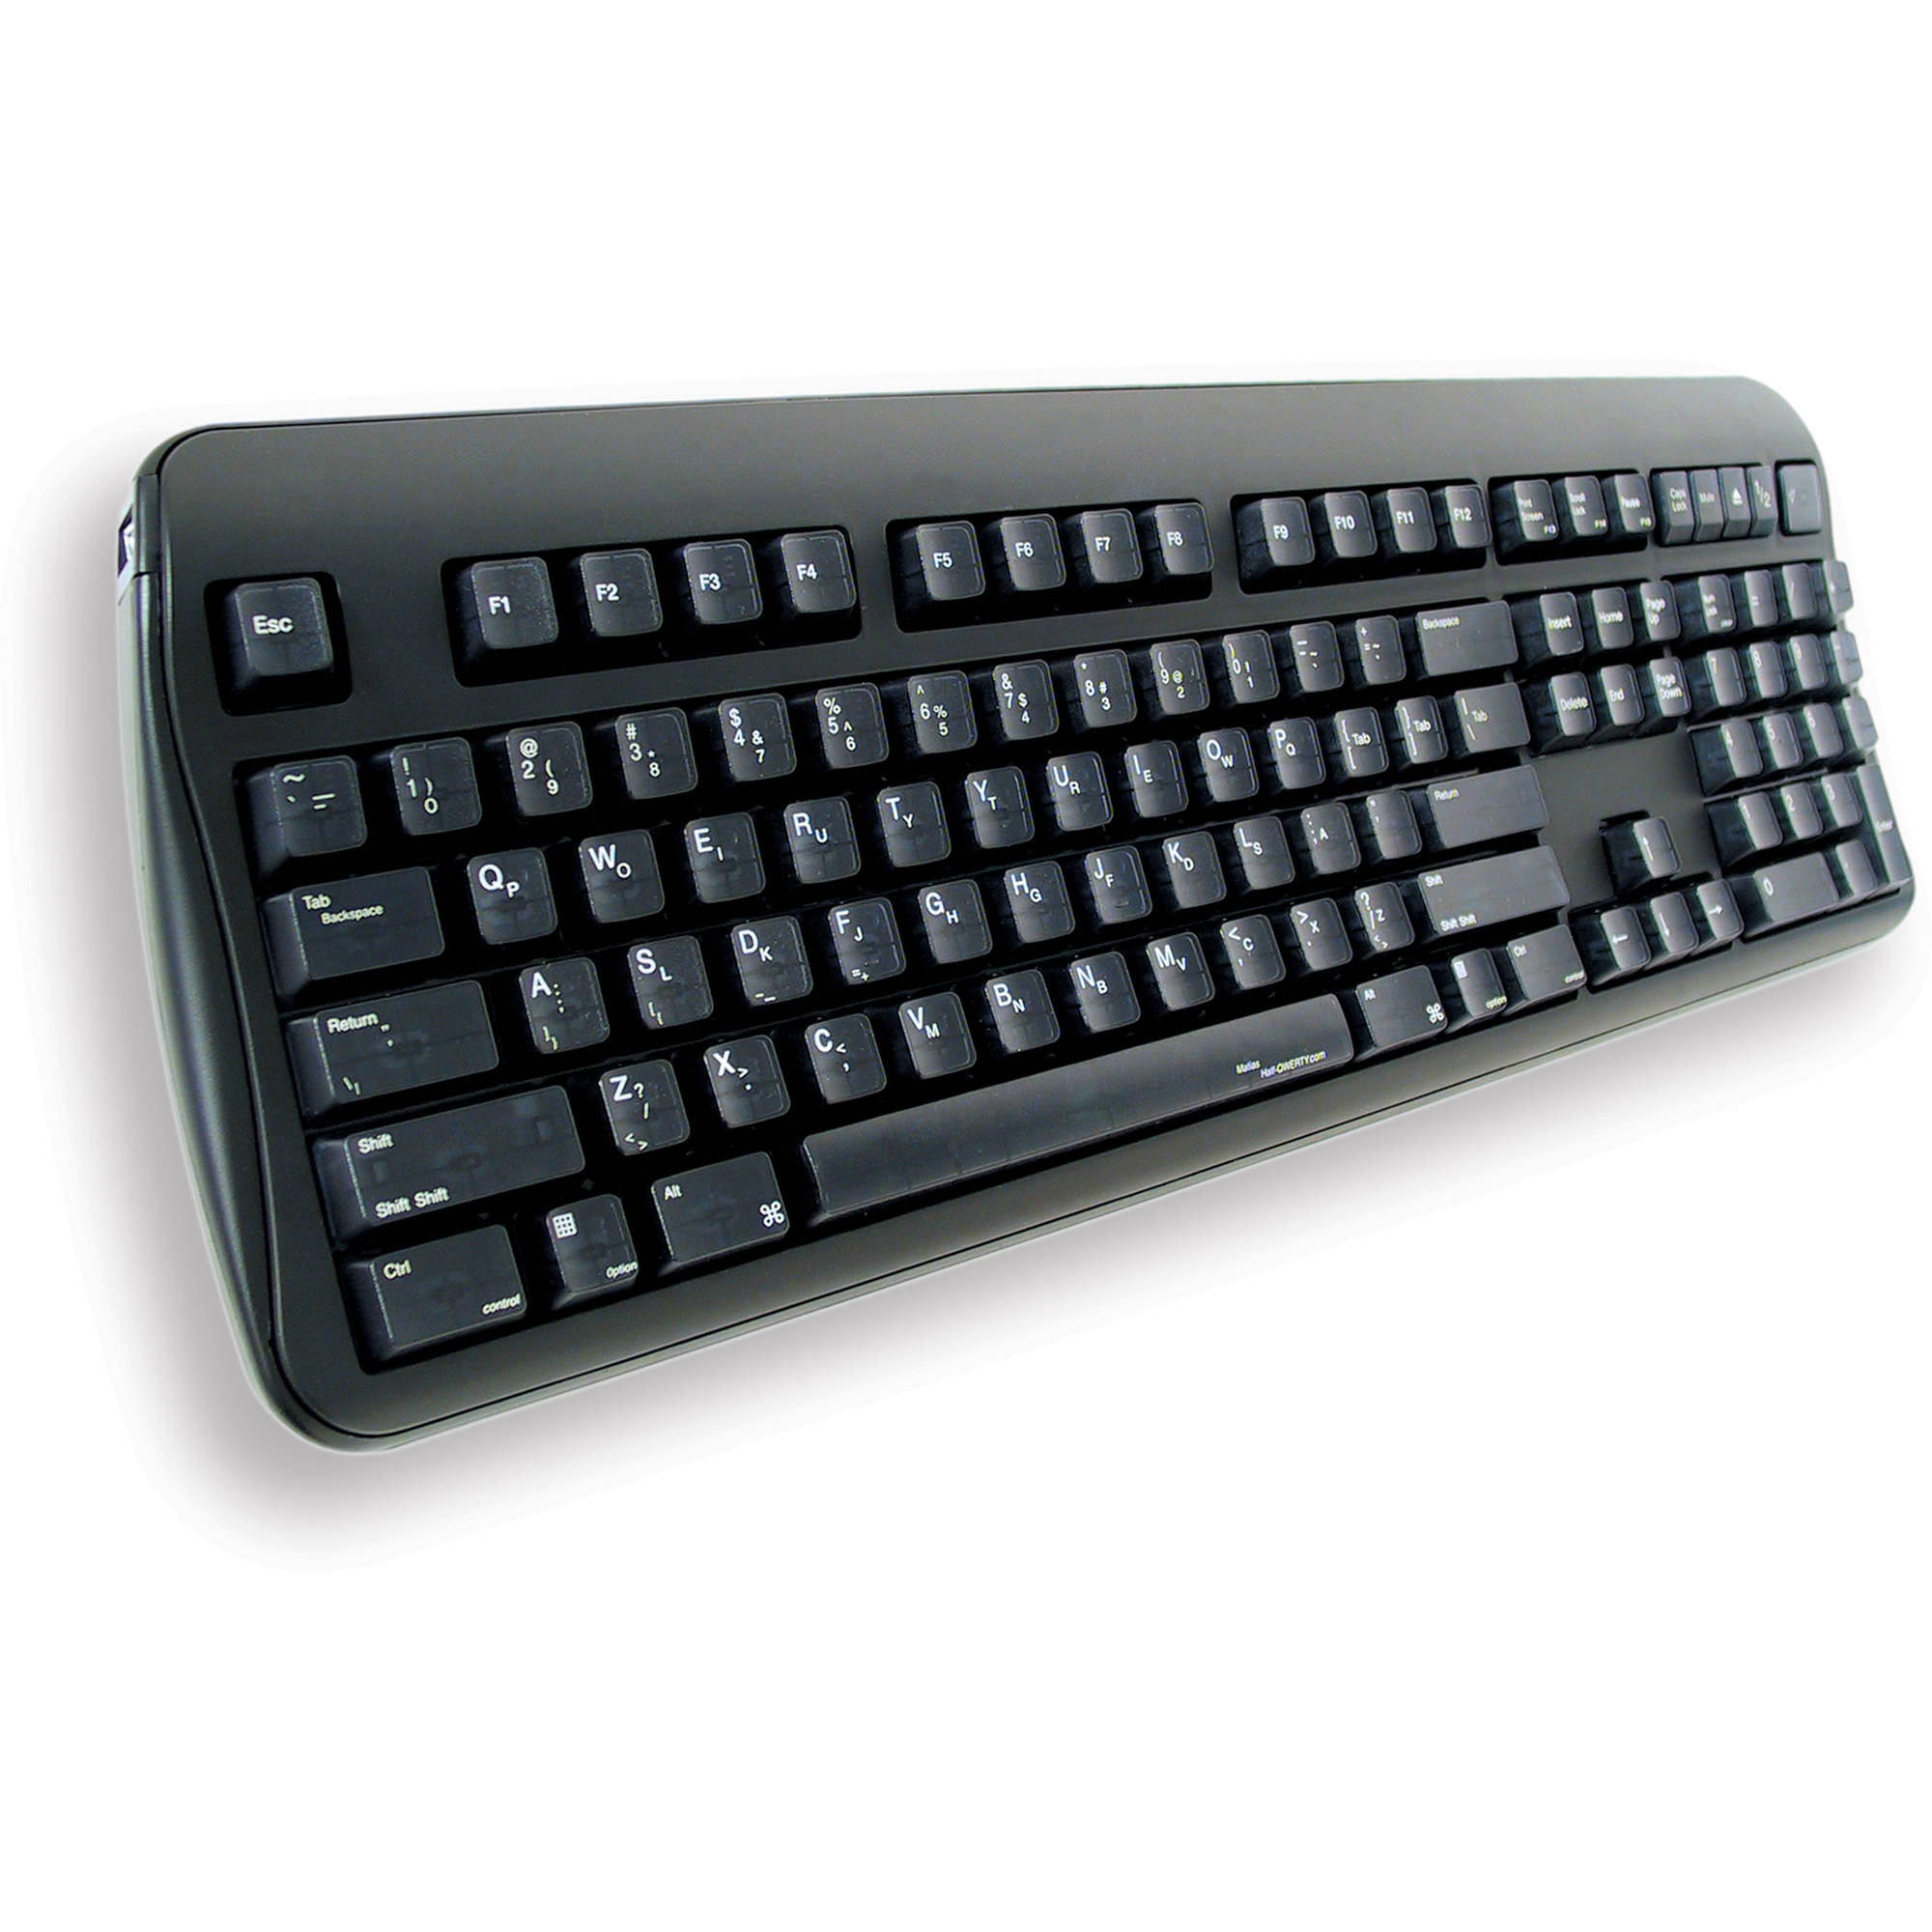 Matias Half-QWERTY 508 Keyboard for One-Handed Typing FK101-508